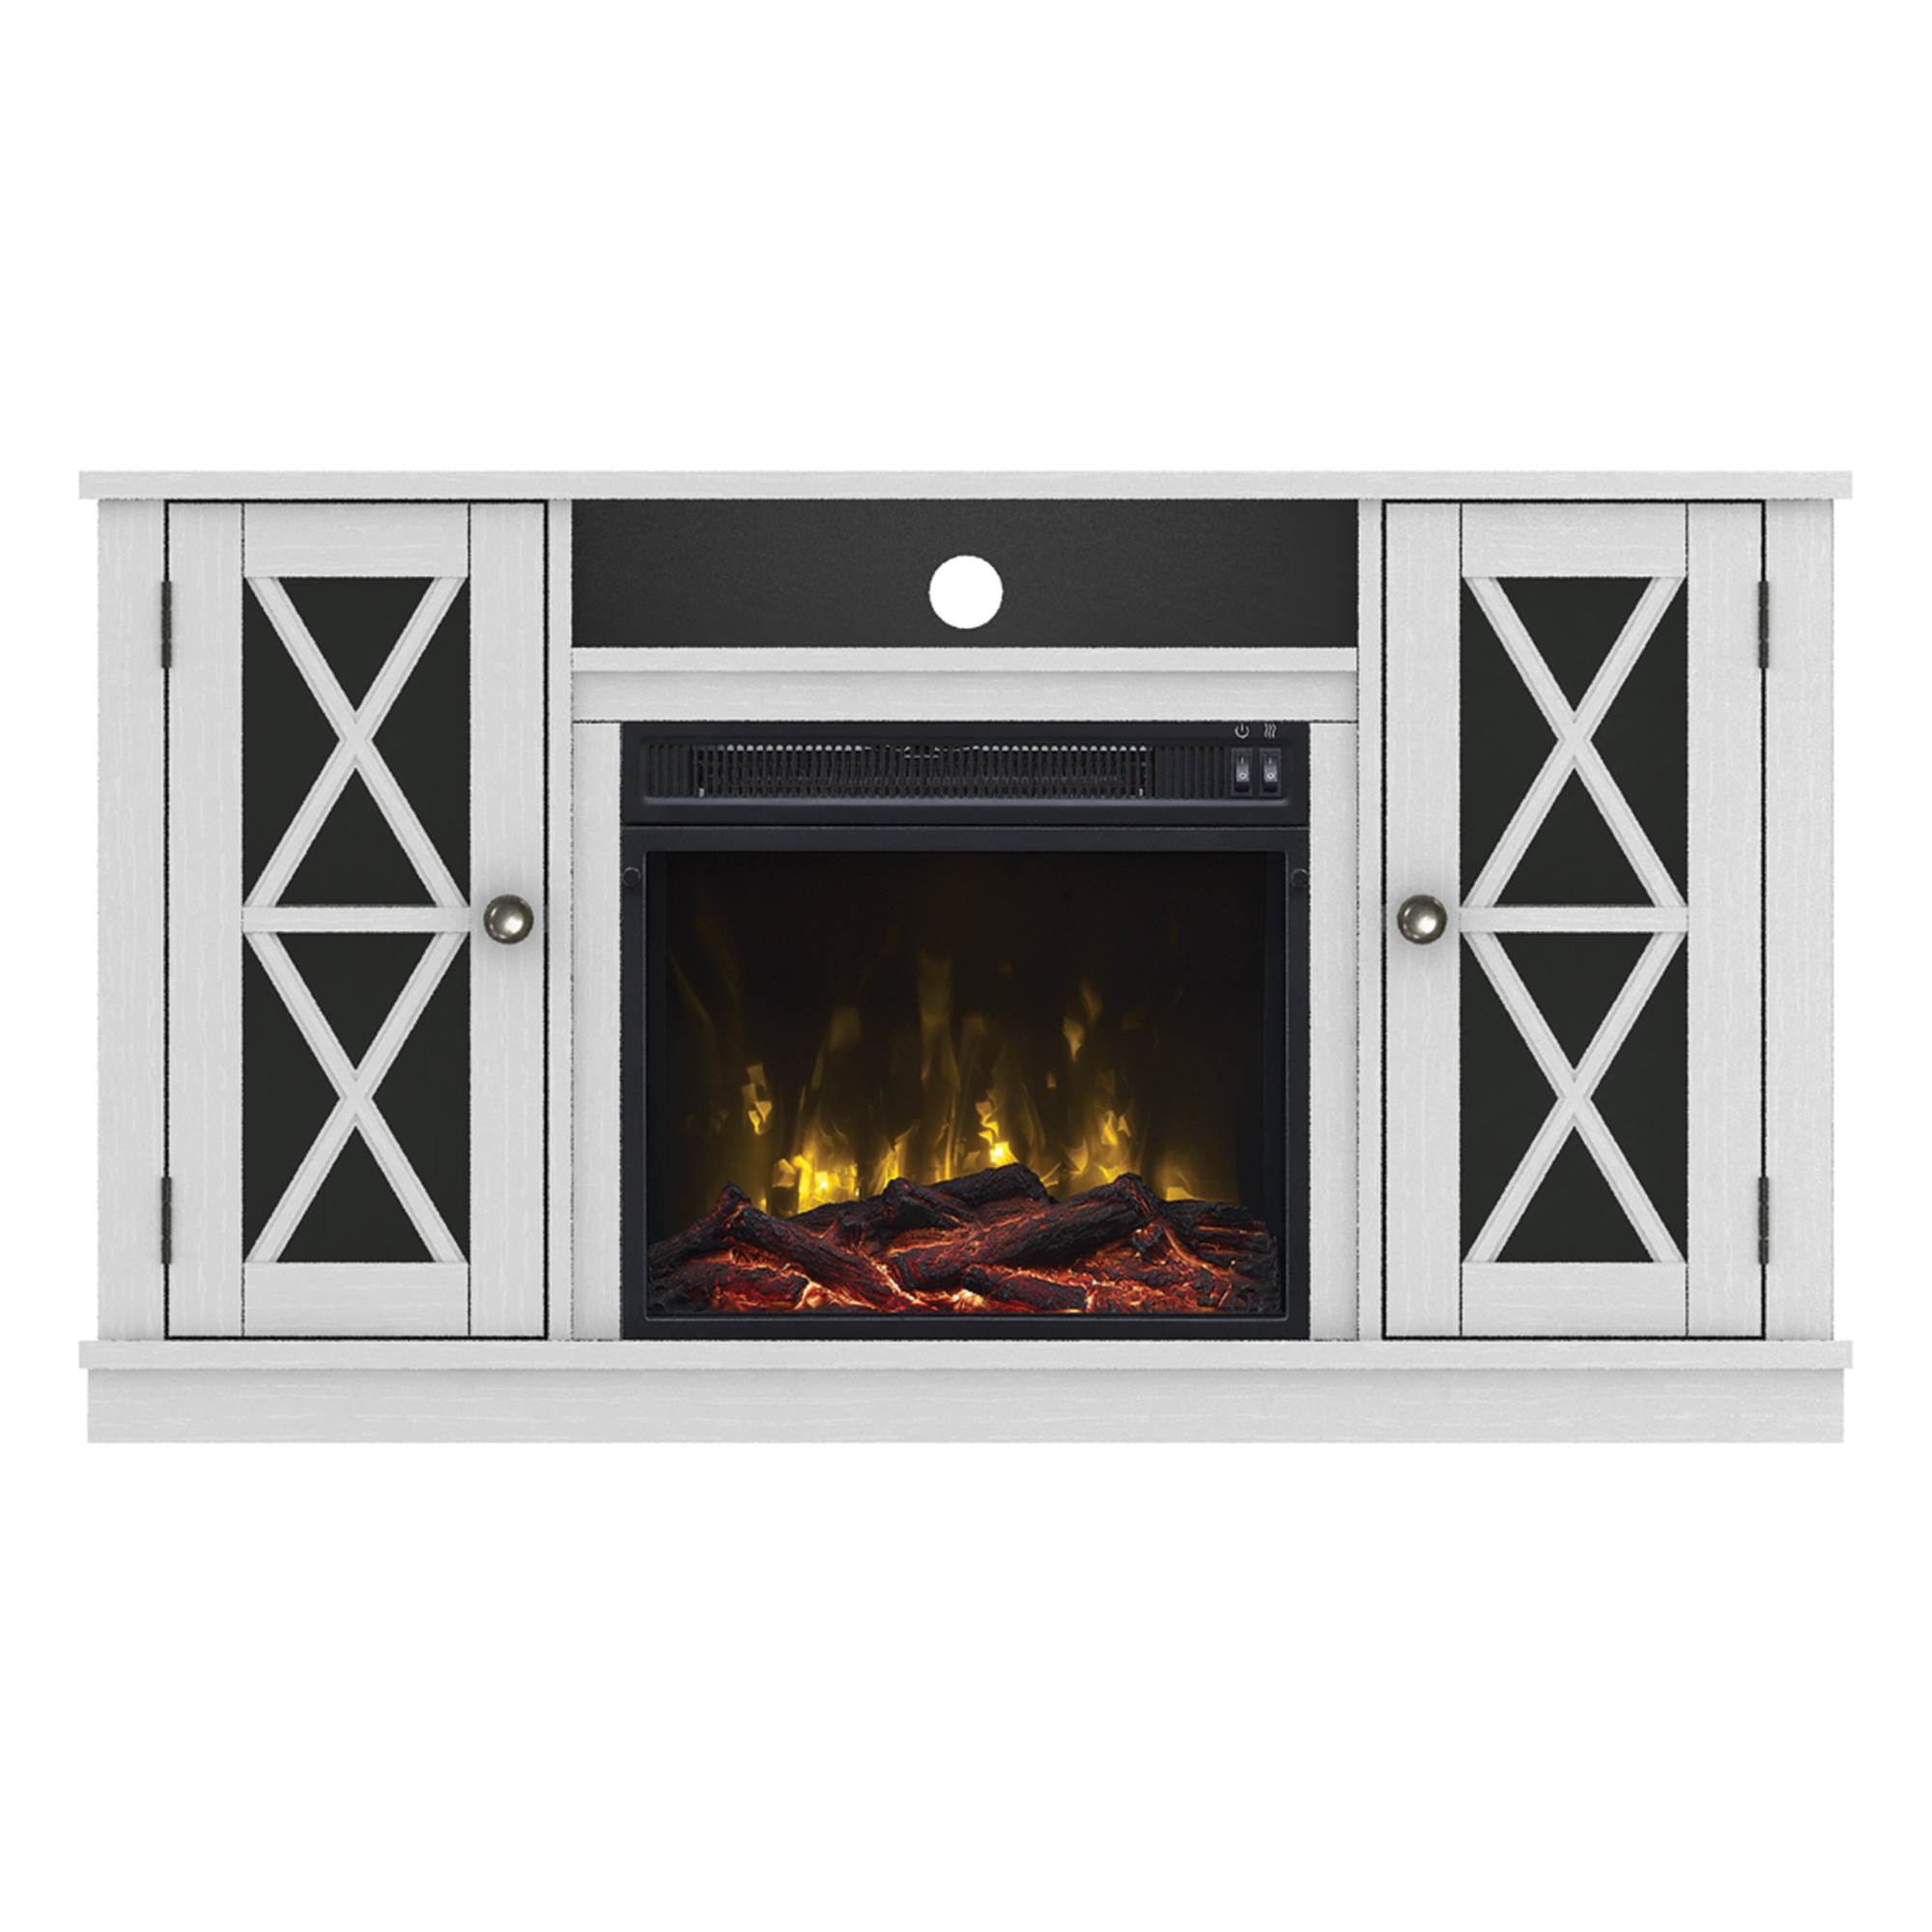 Fireplace Tv Stand Barn Door New White Fireplace Tv Stand